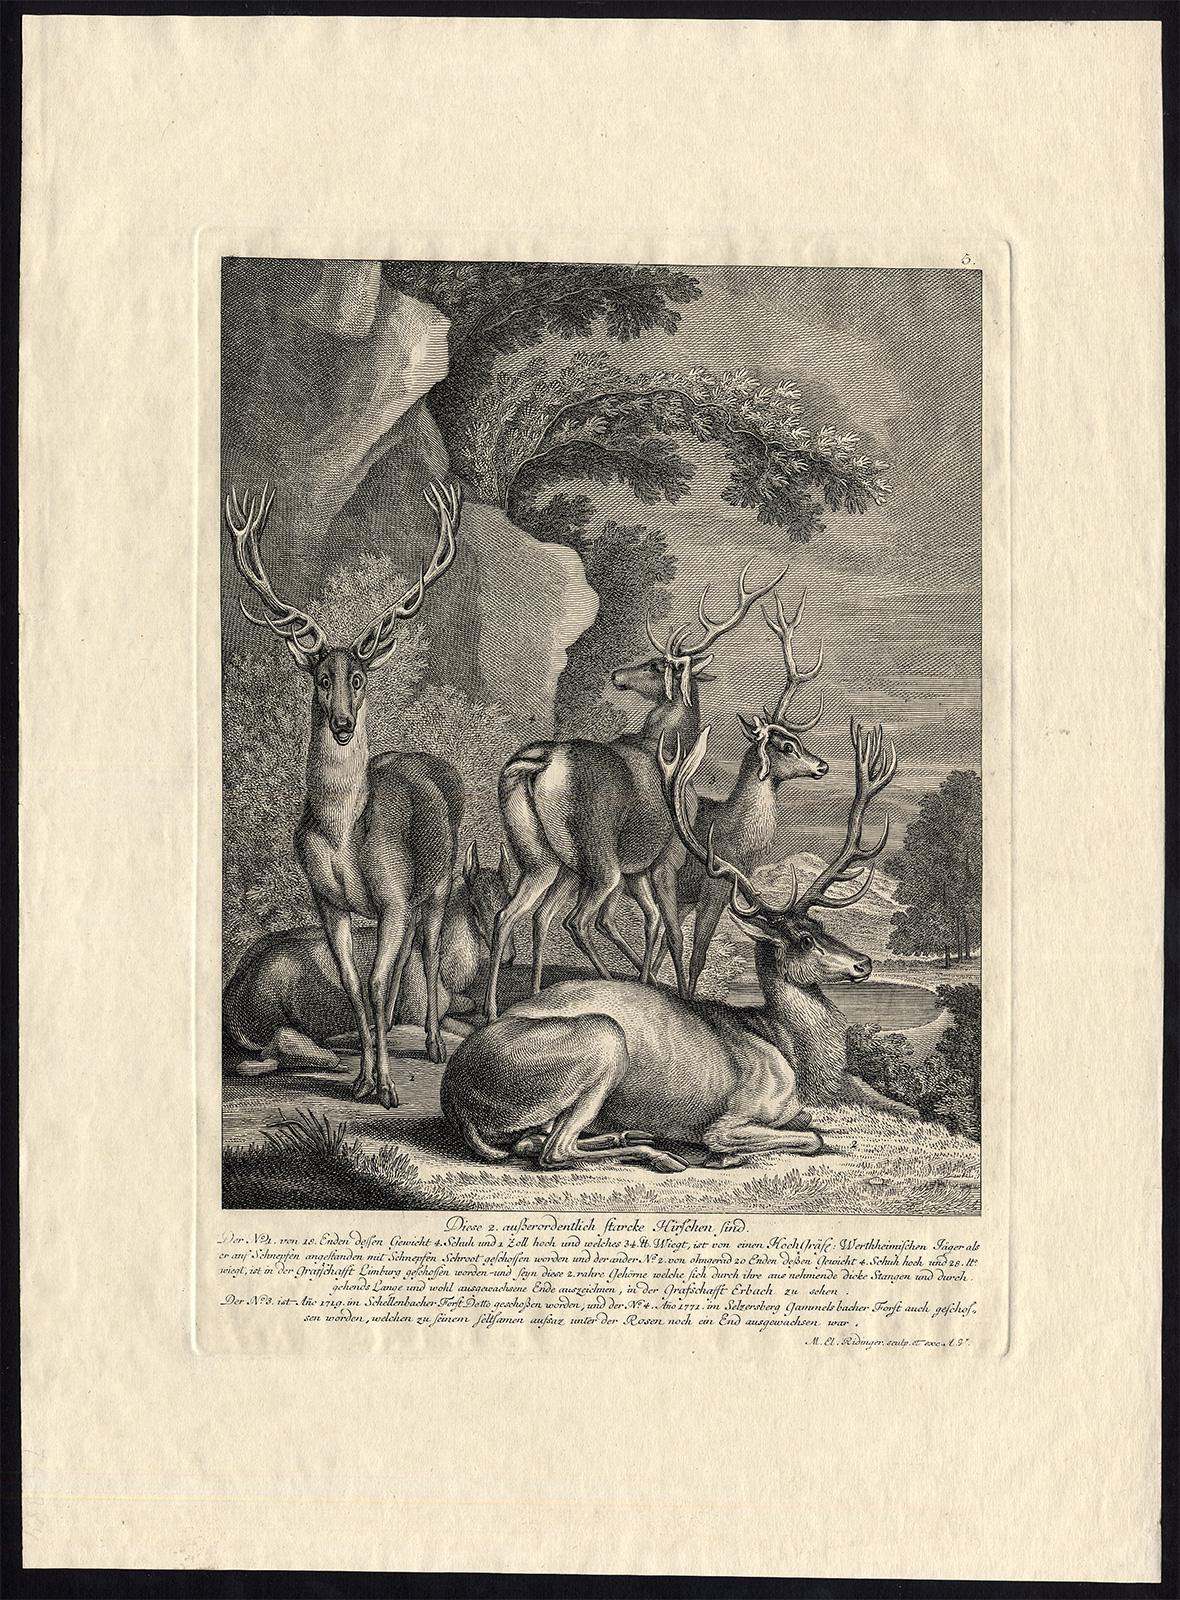 Antique hunting scene print with five deers by Ridinger - Engraving - 18th centu - Print by Martin Elias Ridinger